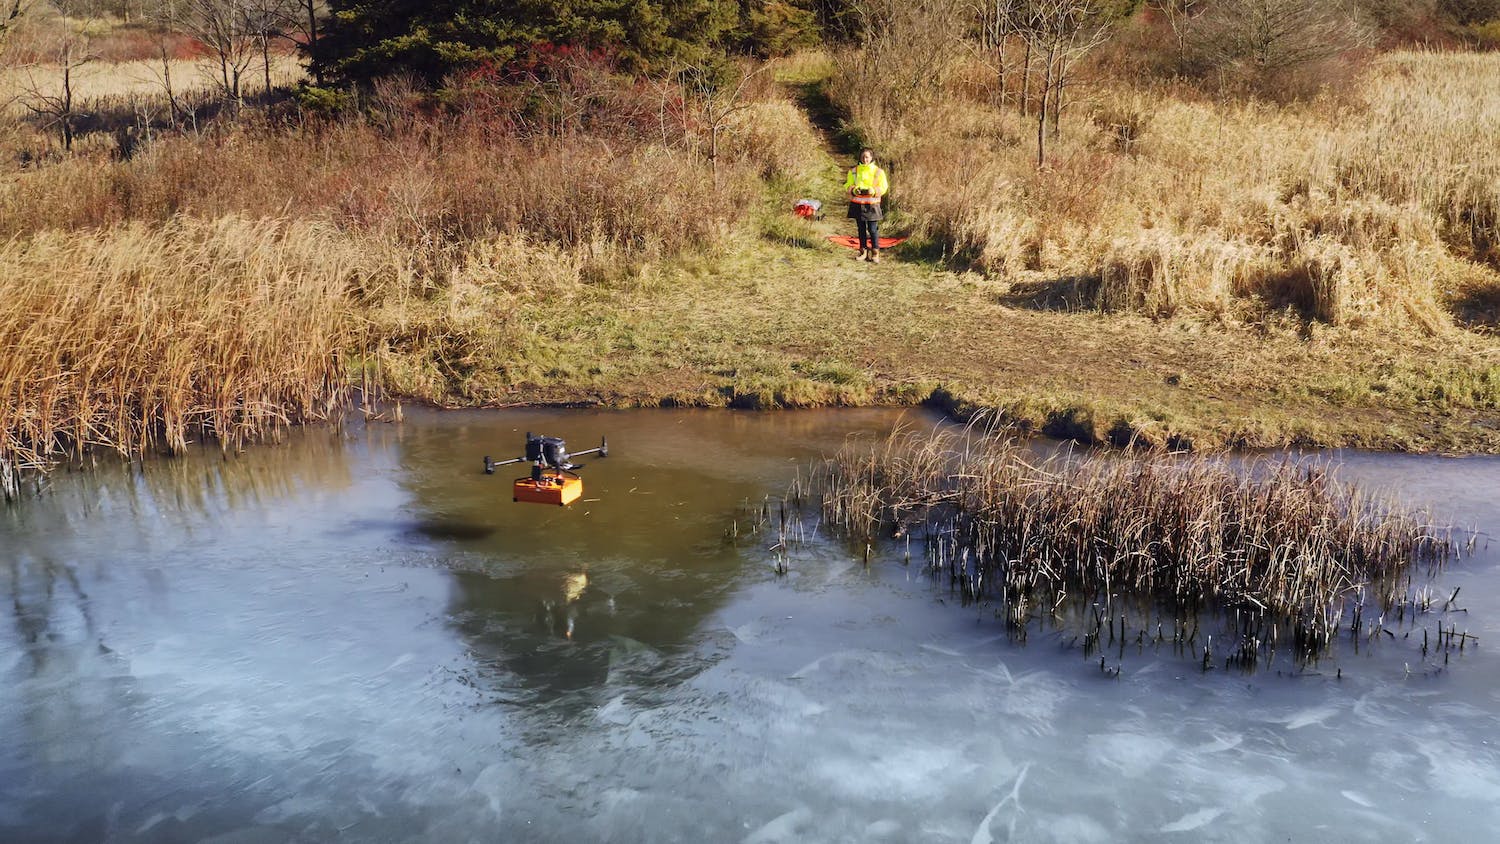 An AltoMaxx drone, equipped with ground penetrating radar, flys over a partially frozen pond to collect data on what's under the surface. - Contributed